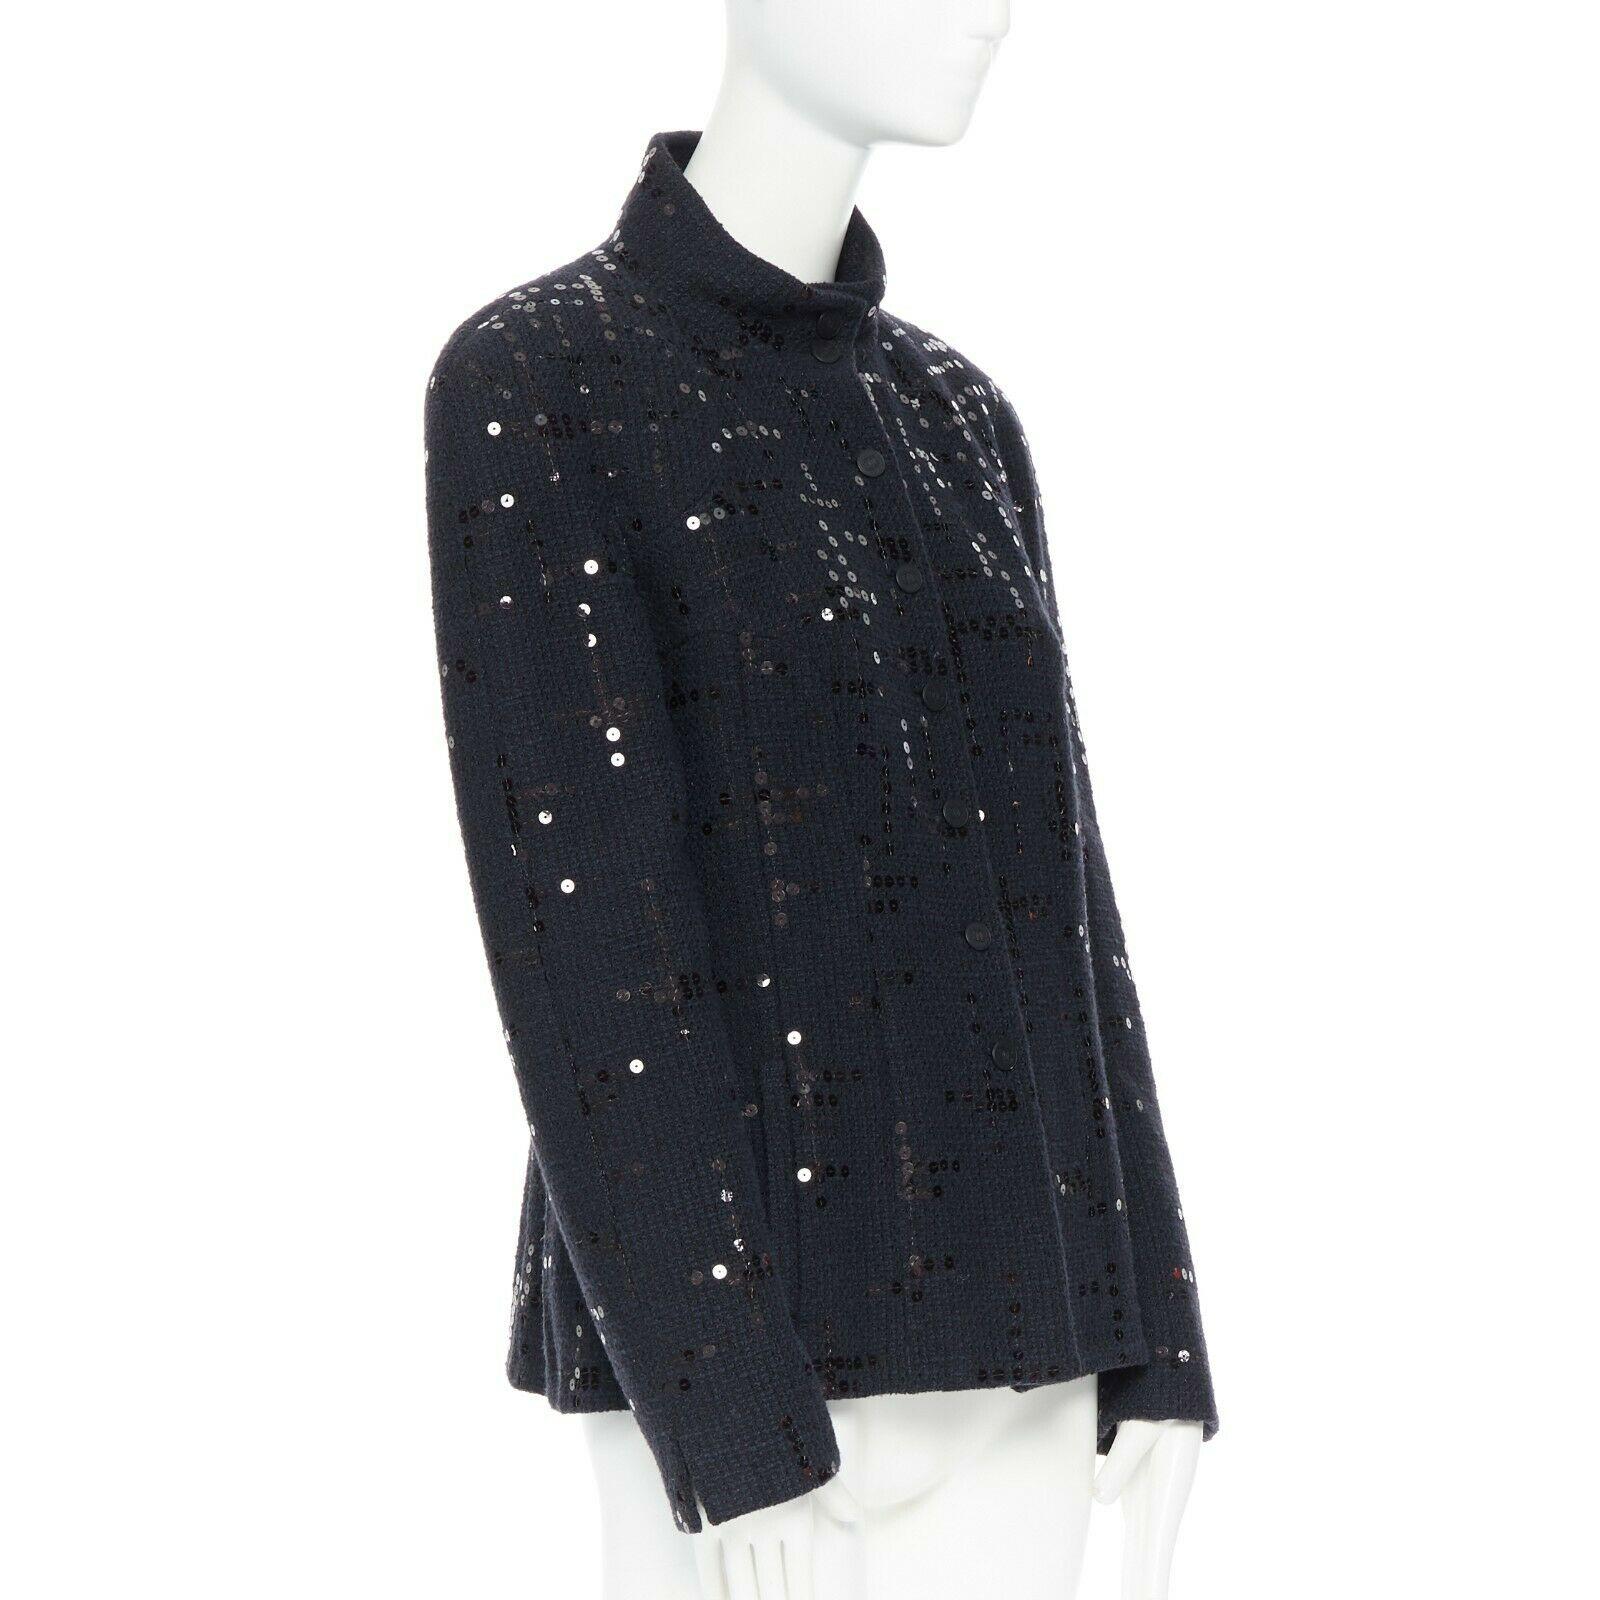 CHANEL 02A LBJ black sequinned. tweed high-neck tonal CC button jacket FR42
Brand: CHANEL
Designer: Karl Lagerfeld
Collection: 02A
Model Name / Style: Tweed jacket
Material: Cotton
Color: Black
Pattern: Solid
Closure: Button
Lining material: